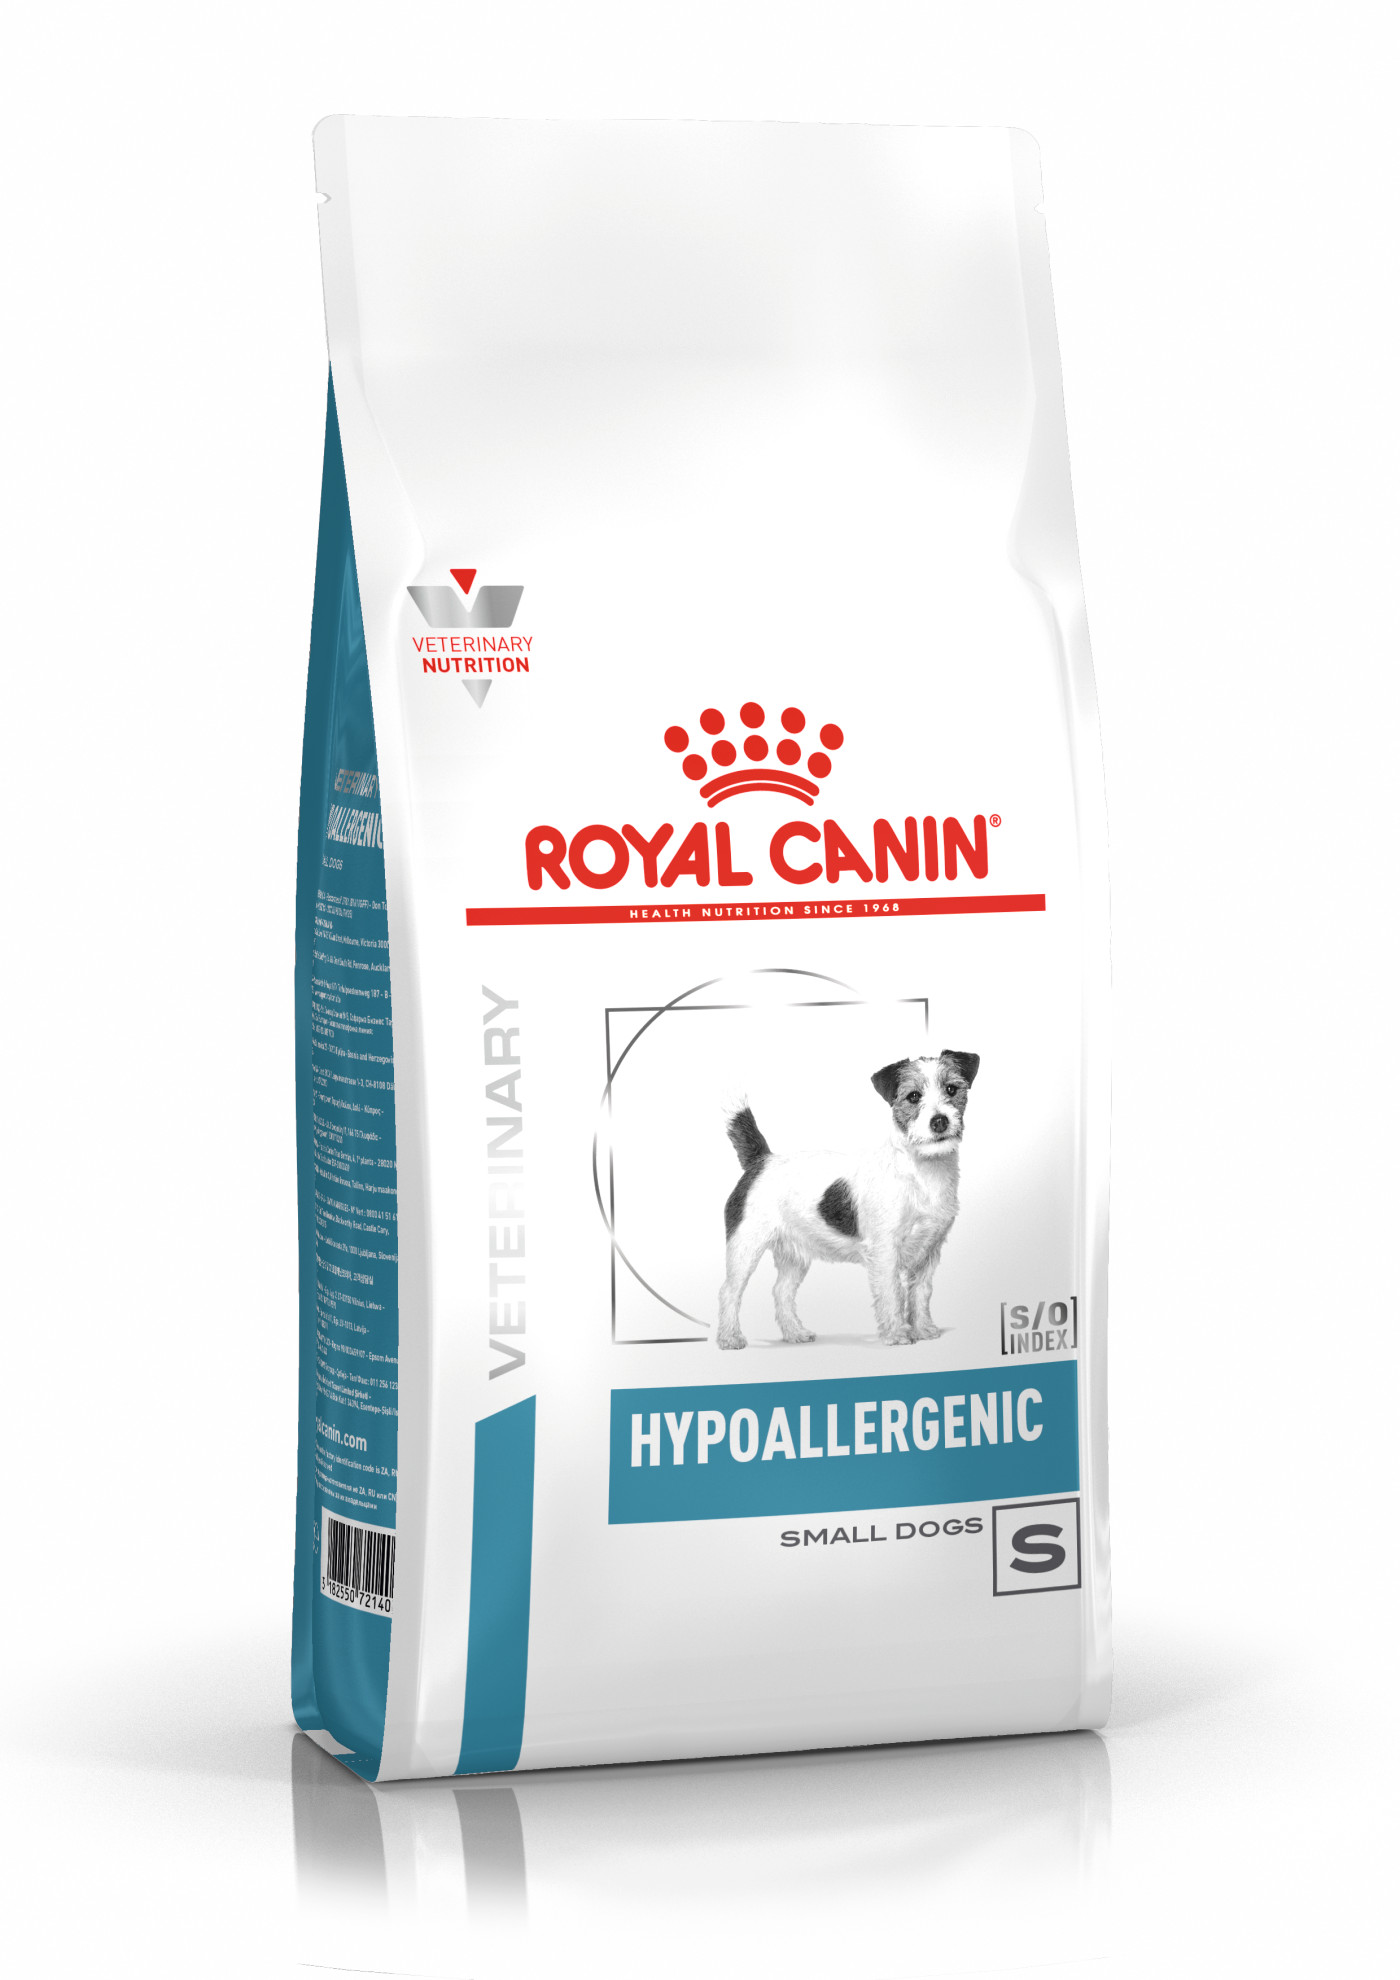 hypoallergenic royal canin small dog